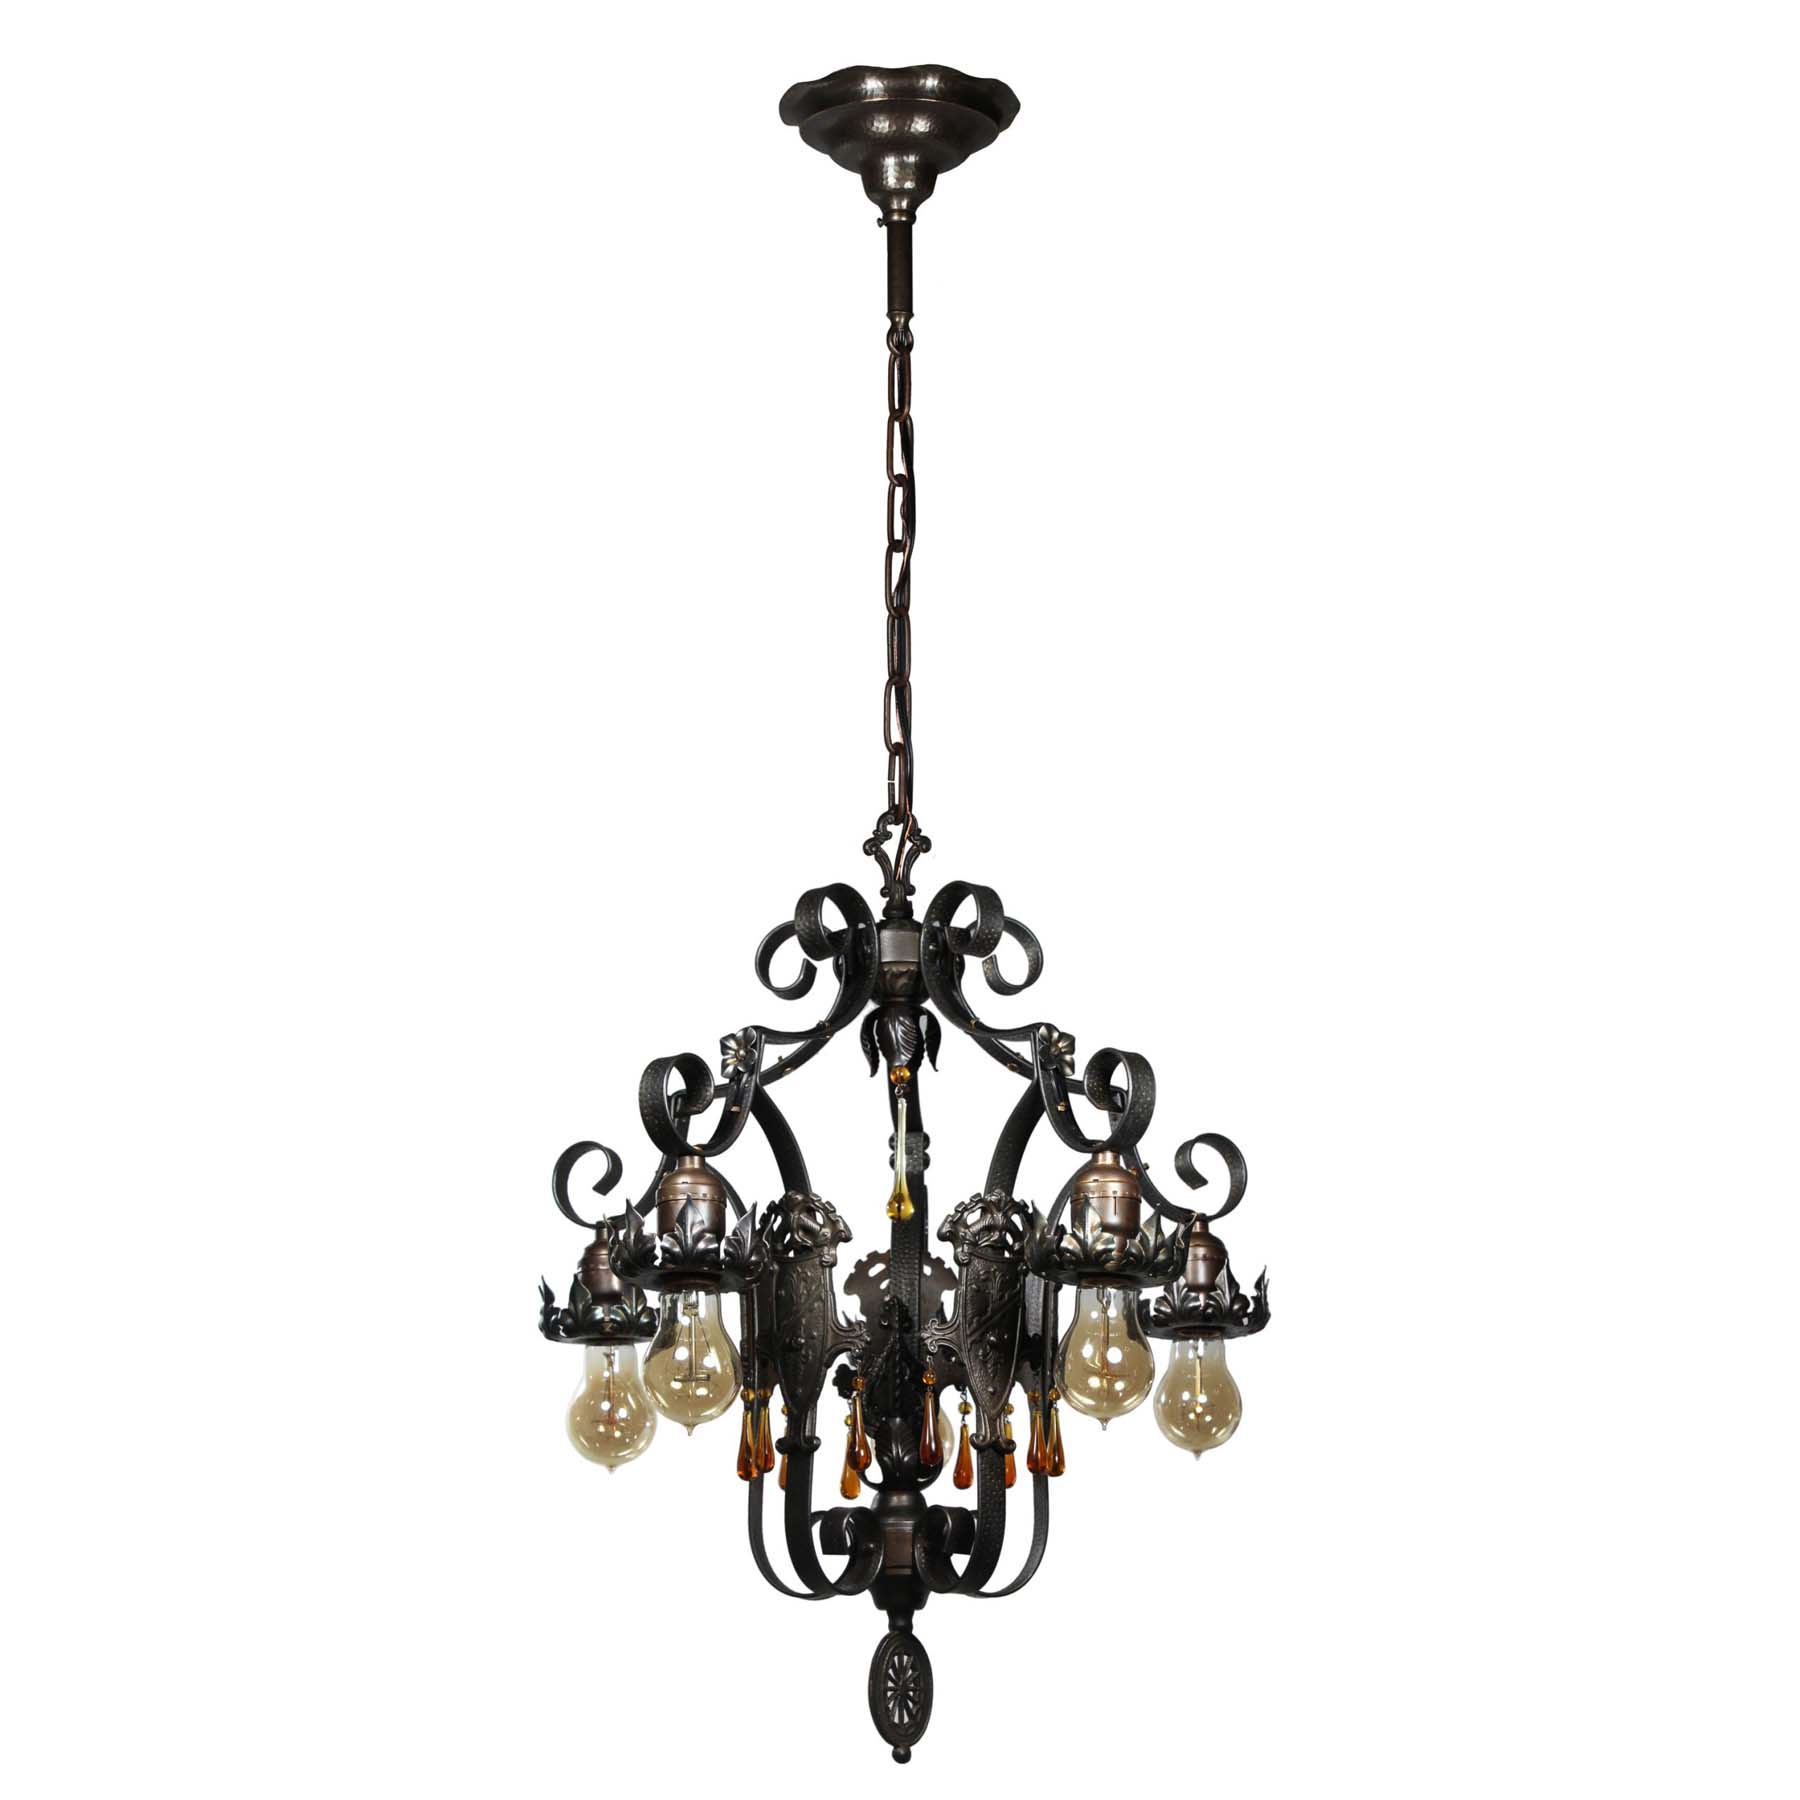 Antique Spanish Revival Five-Light Iron Chandelier, Early 1900s-70503